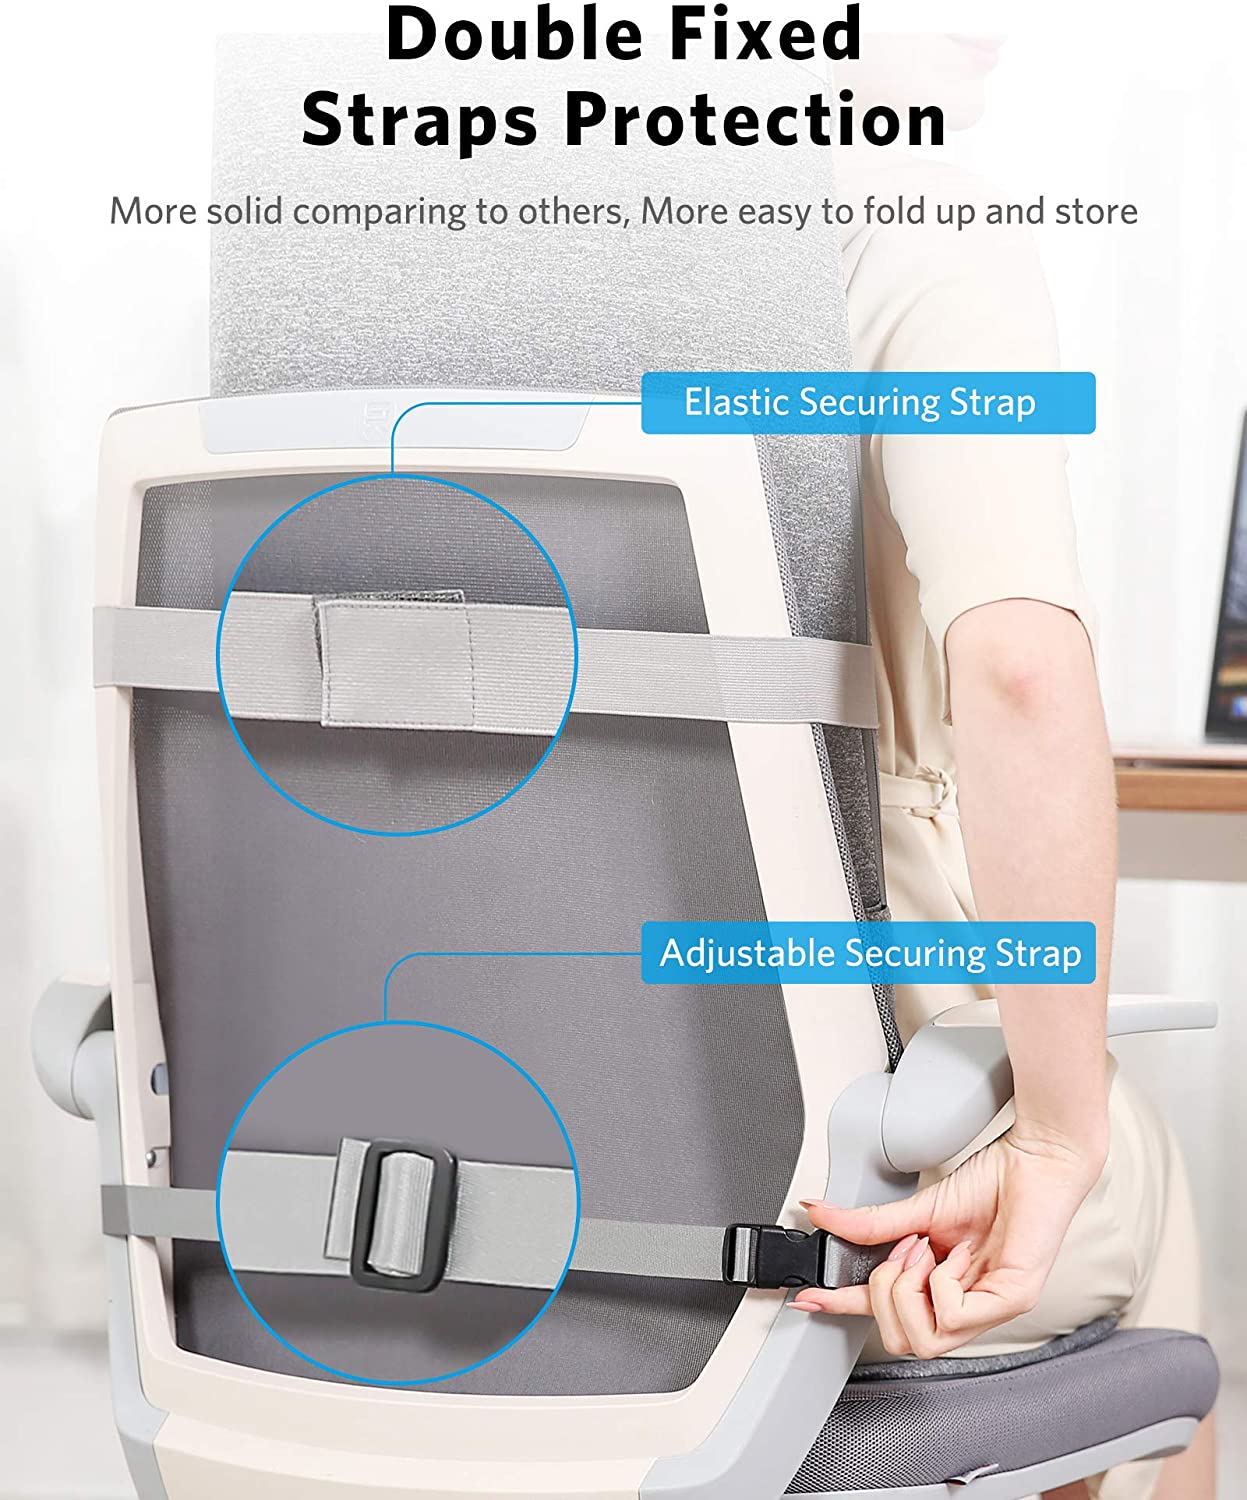 InvoSpa - The Shiatsu back massager comes with a seat vibration mode. The  massager can be used with or without the seat cushion pad, which can be  disconnected from the back massager